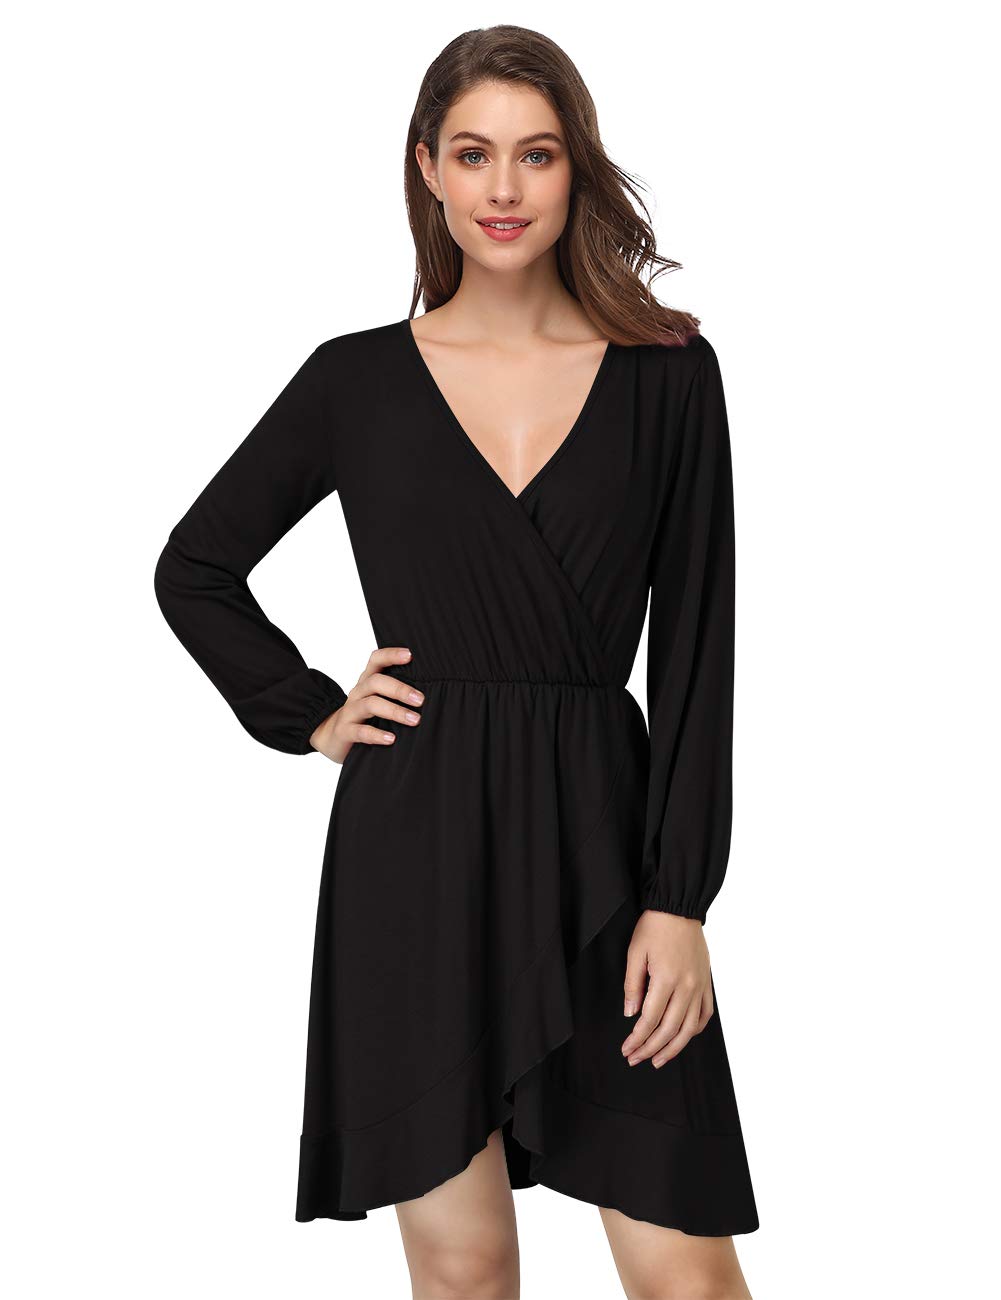 YESFASHION Women's Vneck A-Line Ruffles Cocktail Party Dress